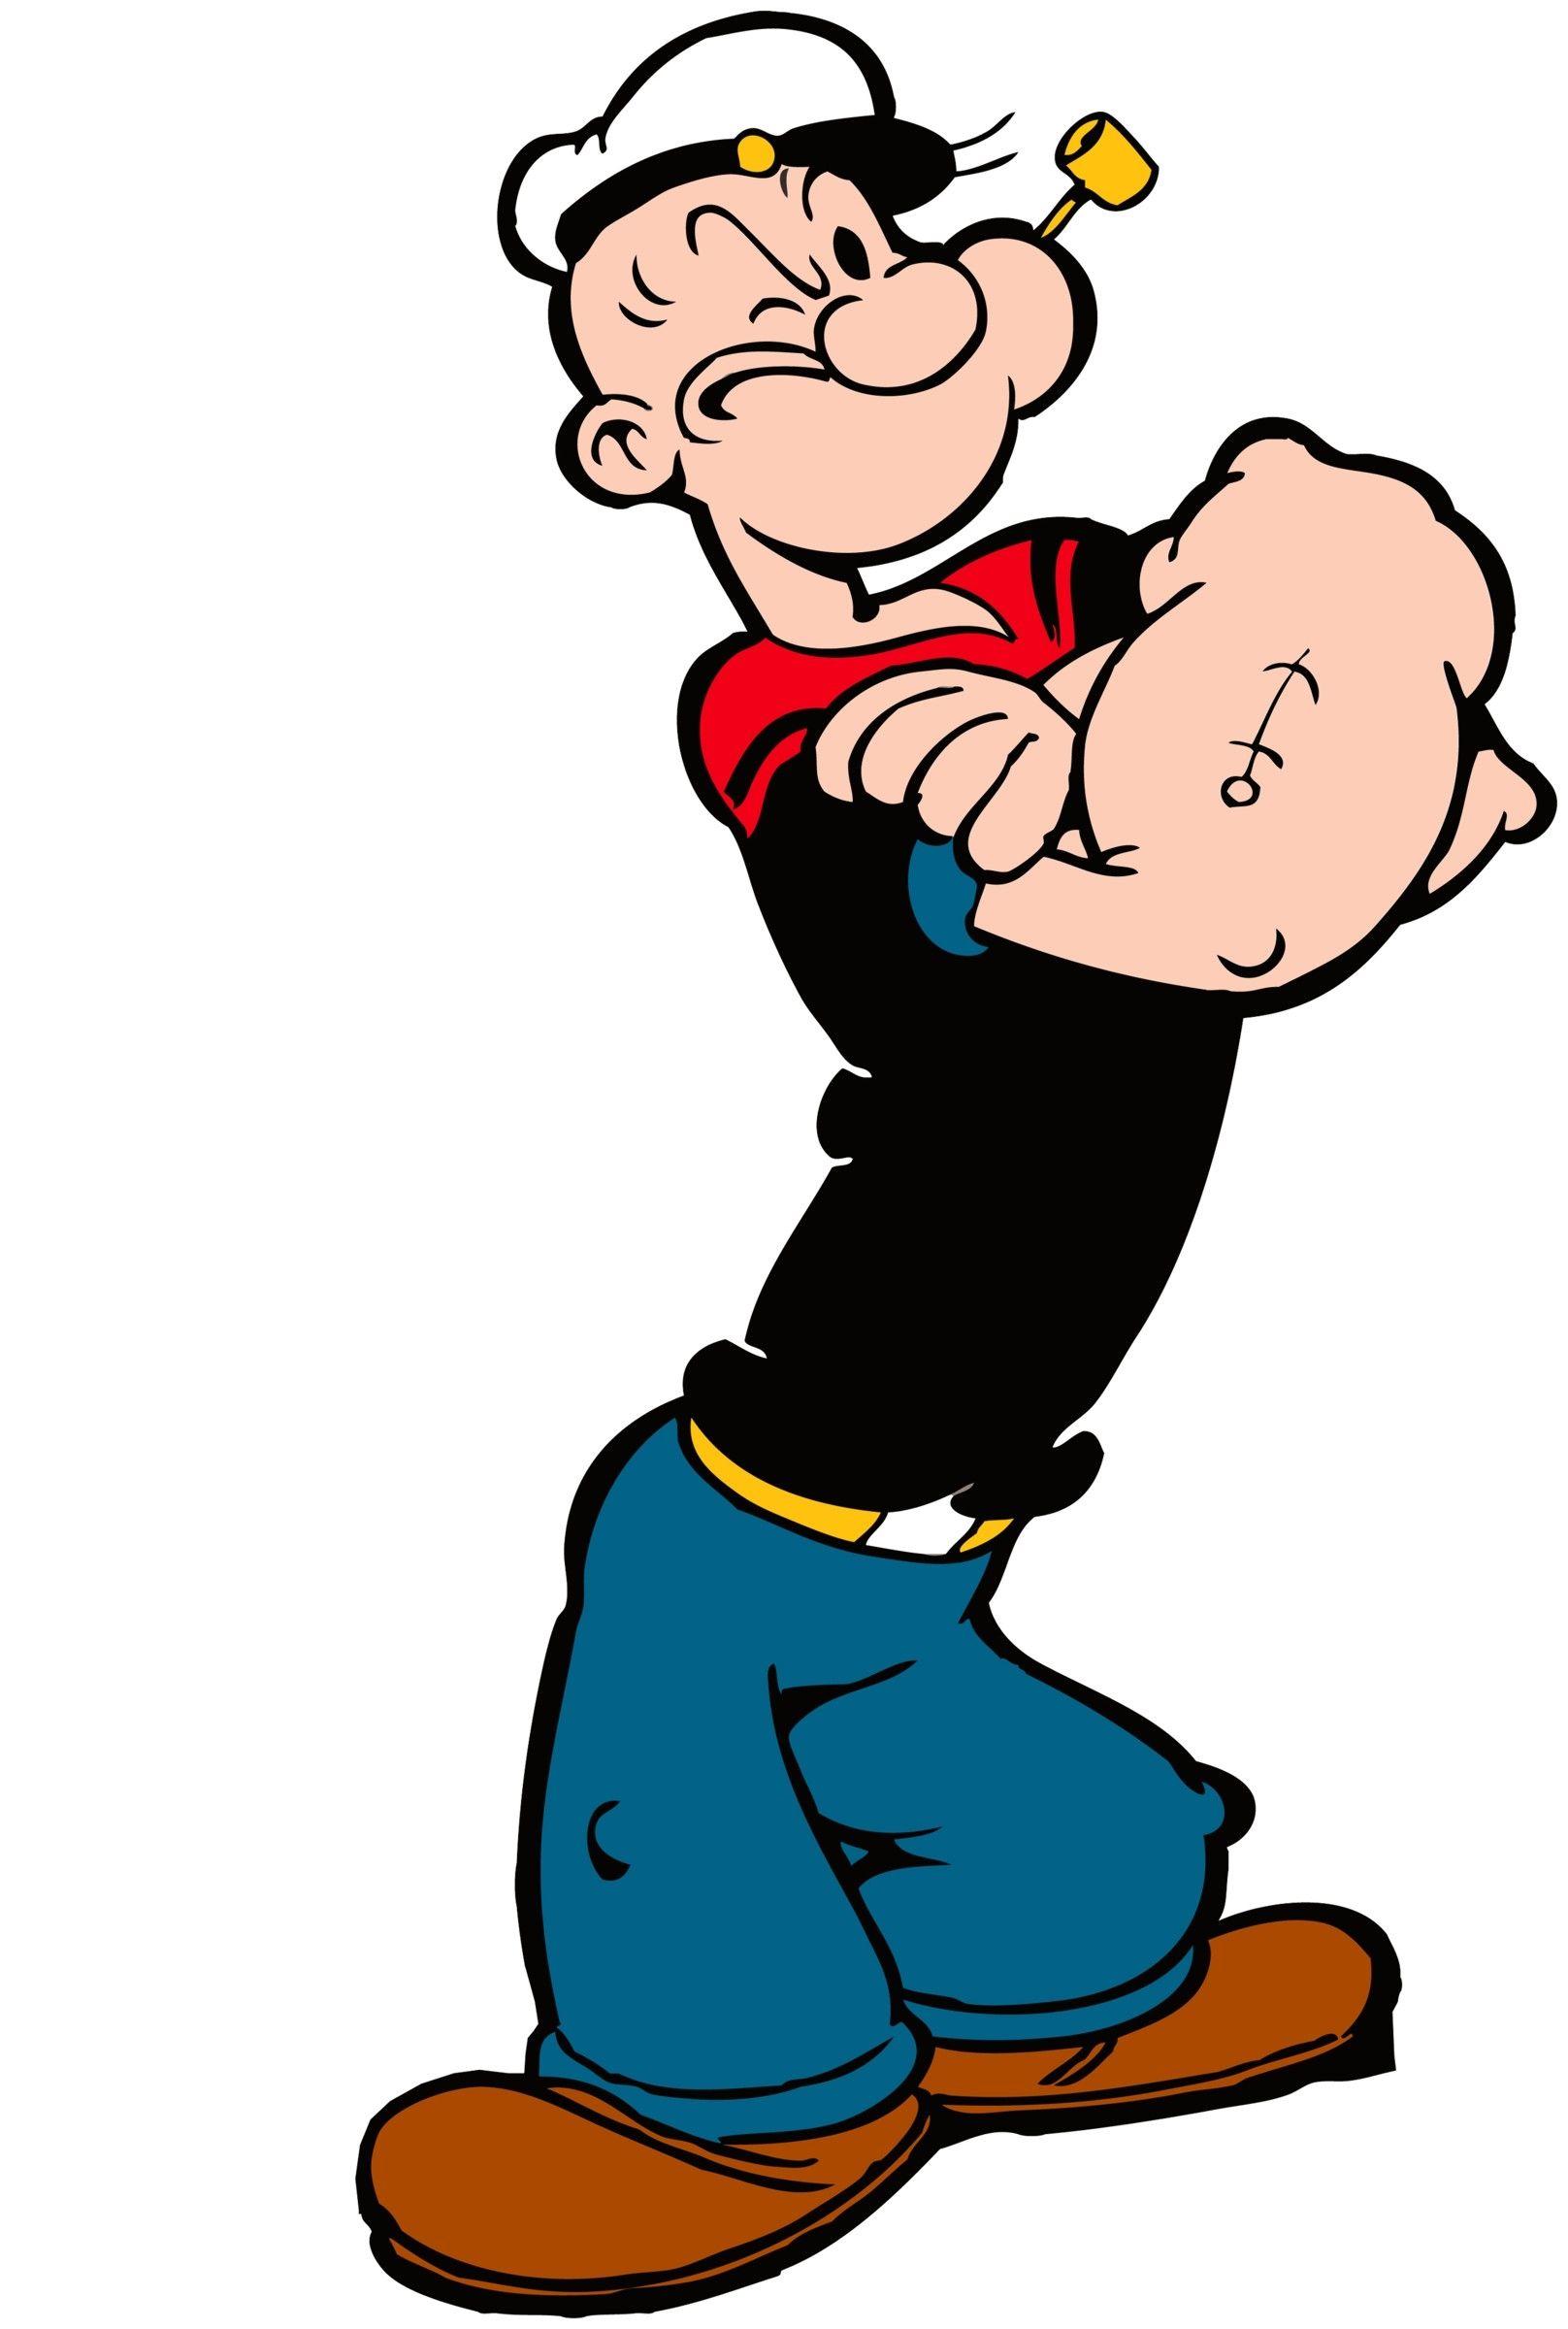 Awesome Popeye Image Download Full Hd Pics Wallpapers Sailor Man